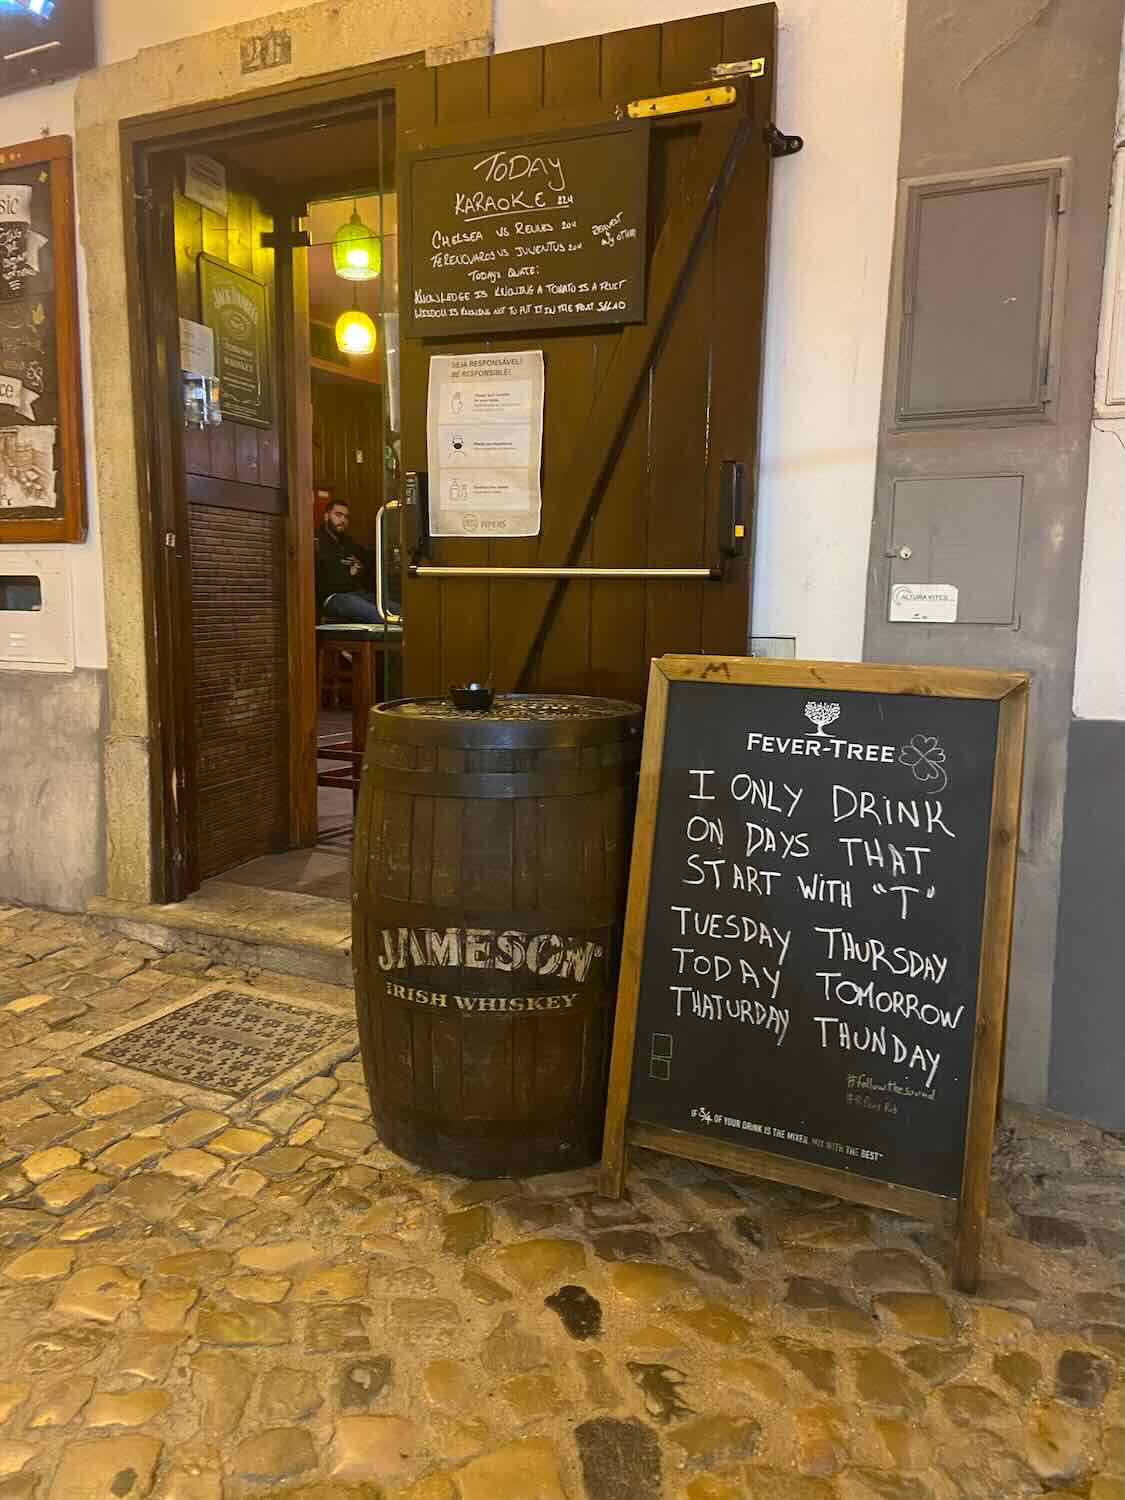 An entrance to a bar in Tavira with a blackboard sign humorously listing days starting with 'T' as drinking days, next to a Jameson Irish Whiskey barrel.